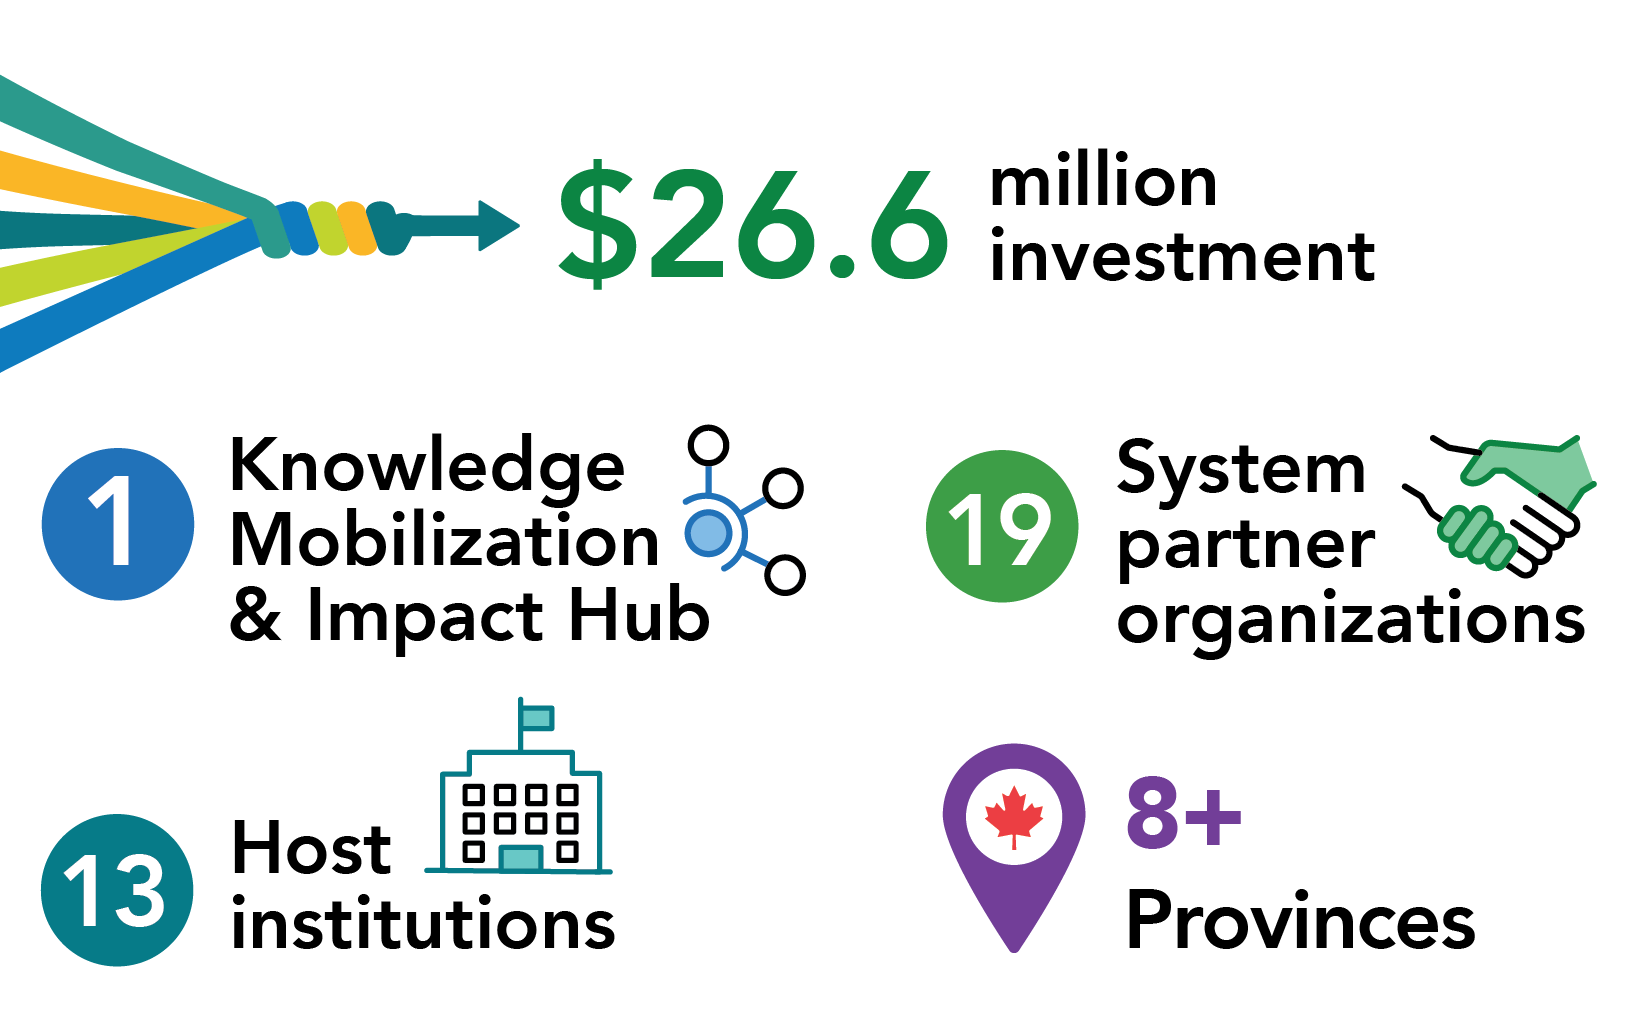 $26.6 million investment, 1 Knowledge Mobilization & Impact Hub, 19 System partner organizations, 13 Host institutions and 8 provinces 